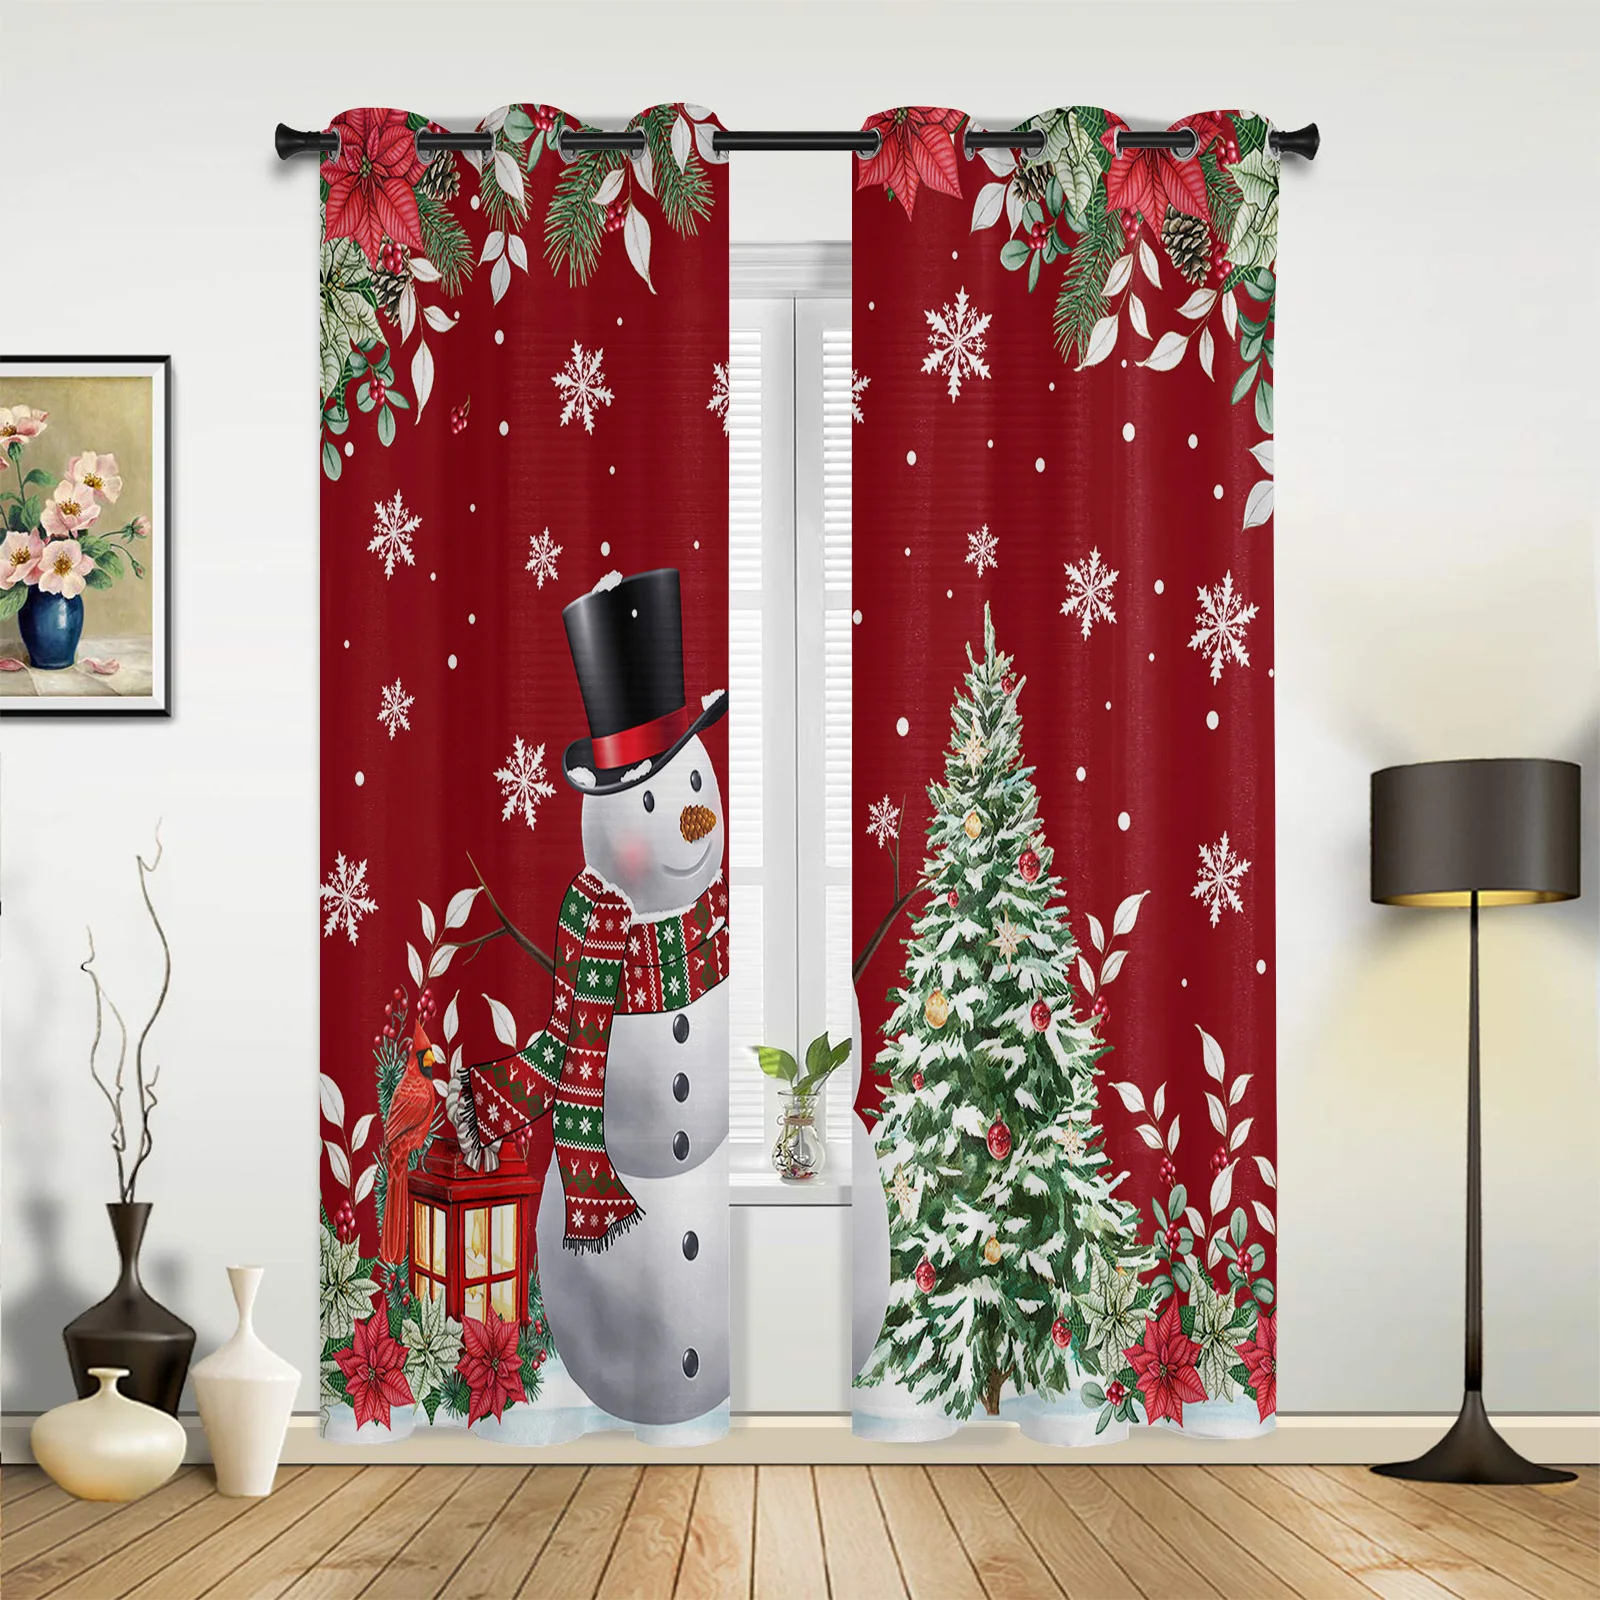 

Christmas Poinsettia Berries Snowman Window Curtains Bedroom Festival Made Finished Drapes Livingroom Window Treatments Curtains